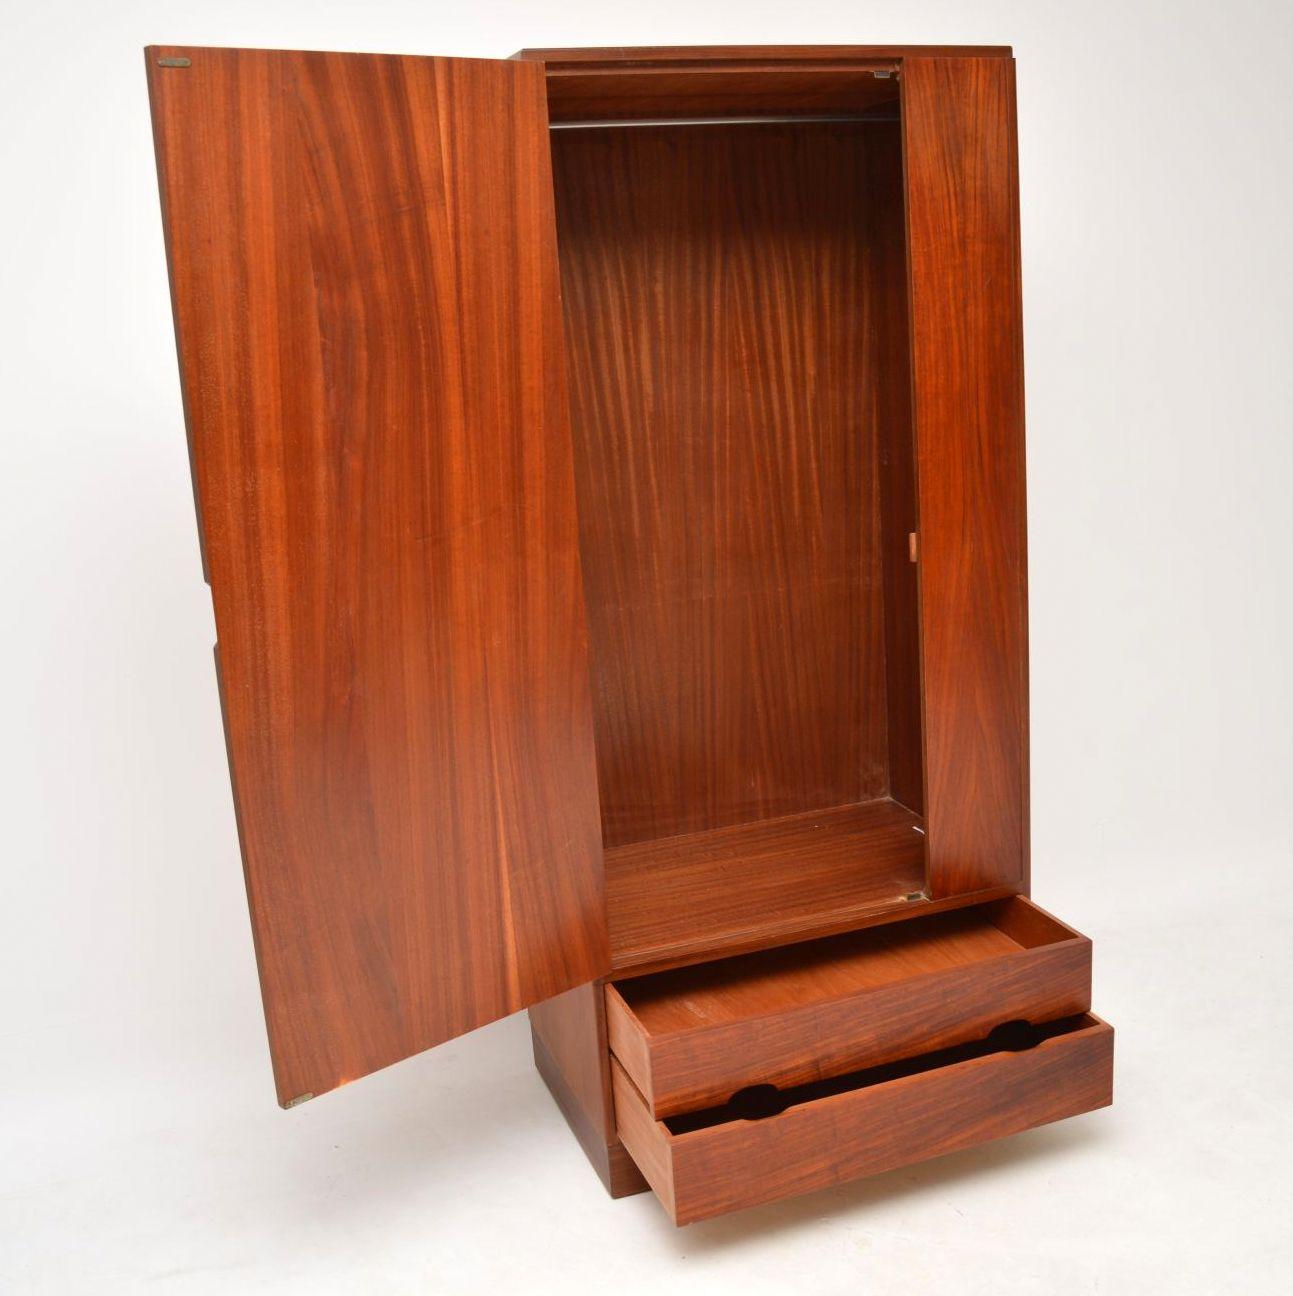 A very stylish and top quality vintage Danish wardrobe in teak, this dates from the 1960s. It’s really well made and in great condition for its age. this has a lovely color, beautiful grain patterns and a fantastic minimal design. This is clean,